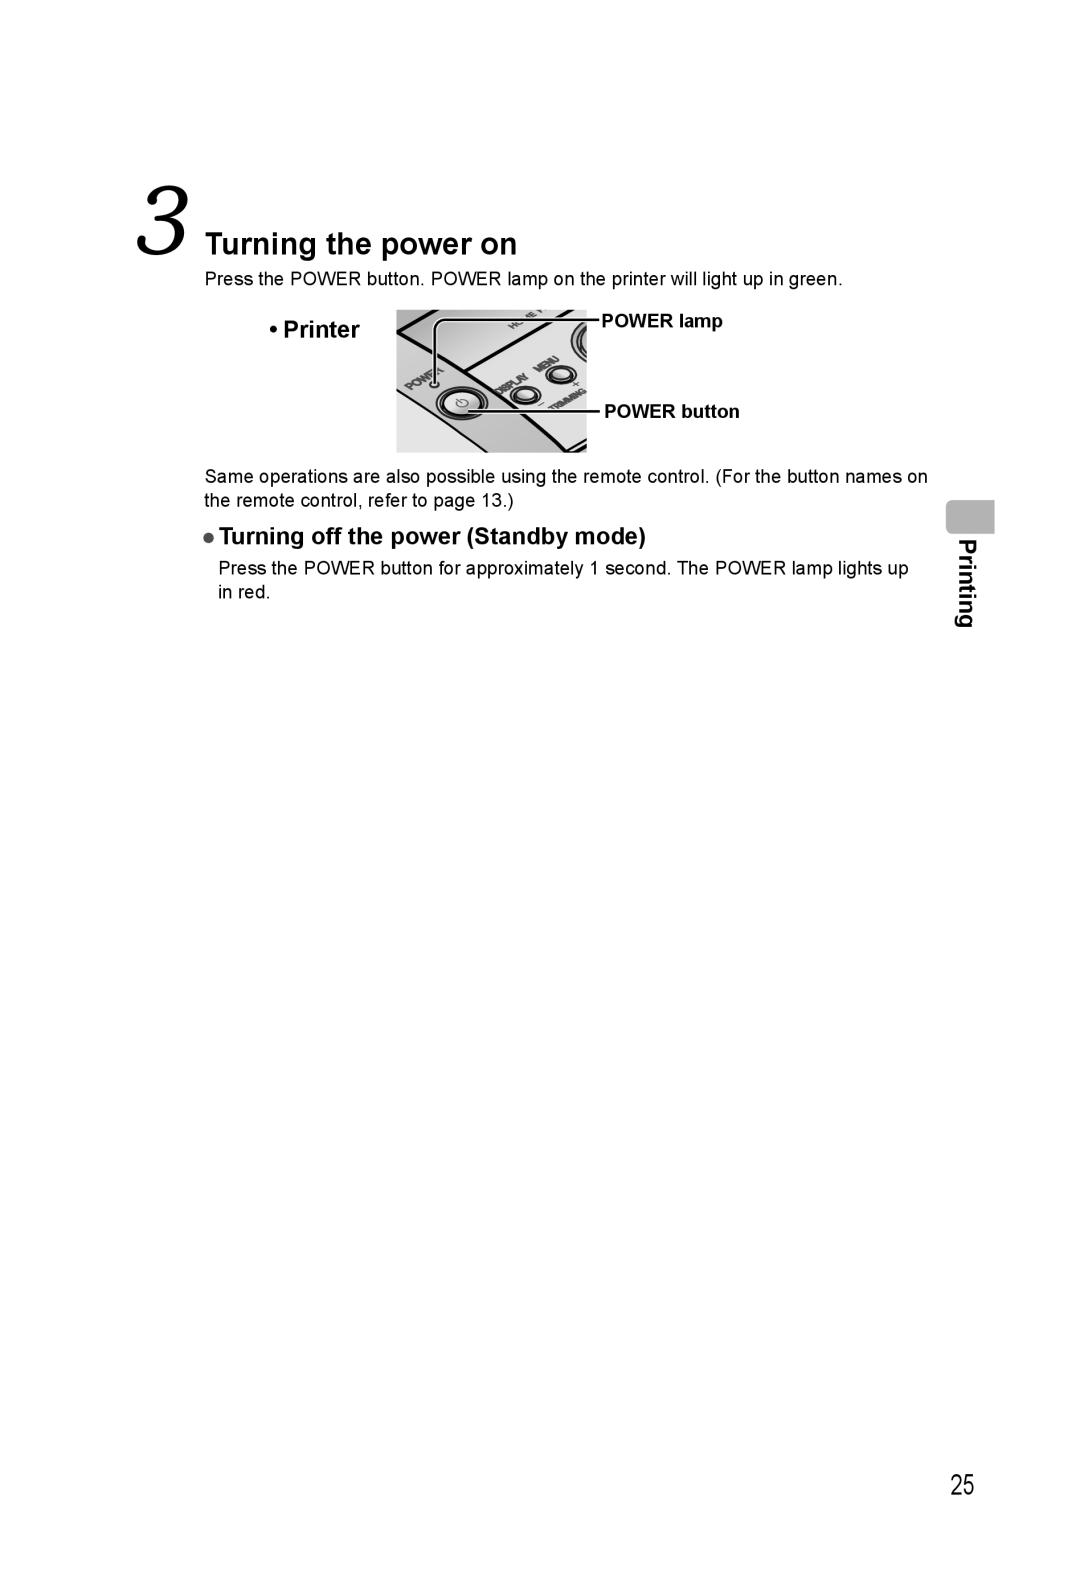 Panasonic KX-PX20M operating instructions Turning the power on, Printer, Turning off the power Standby mode, Printing 